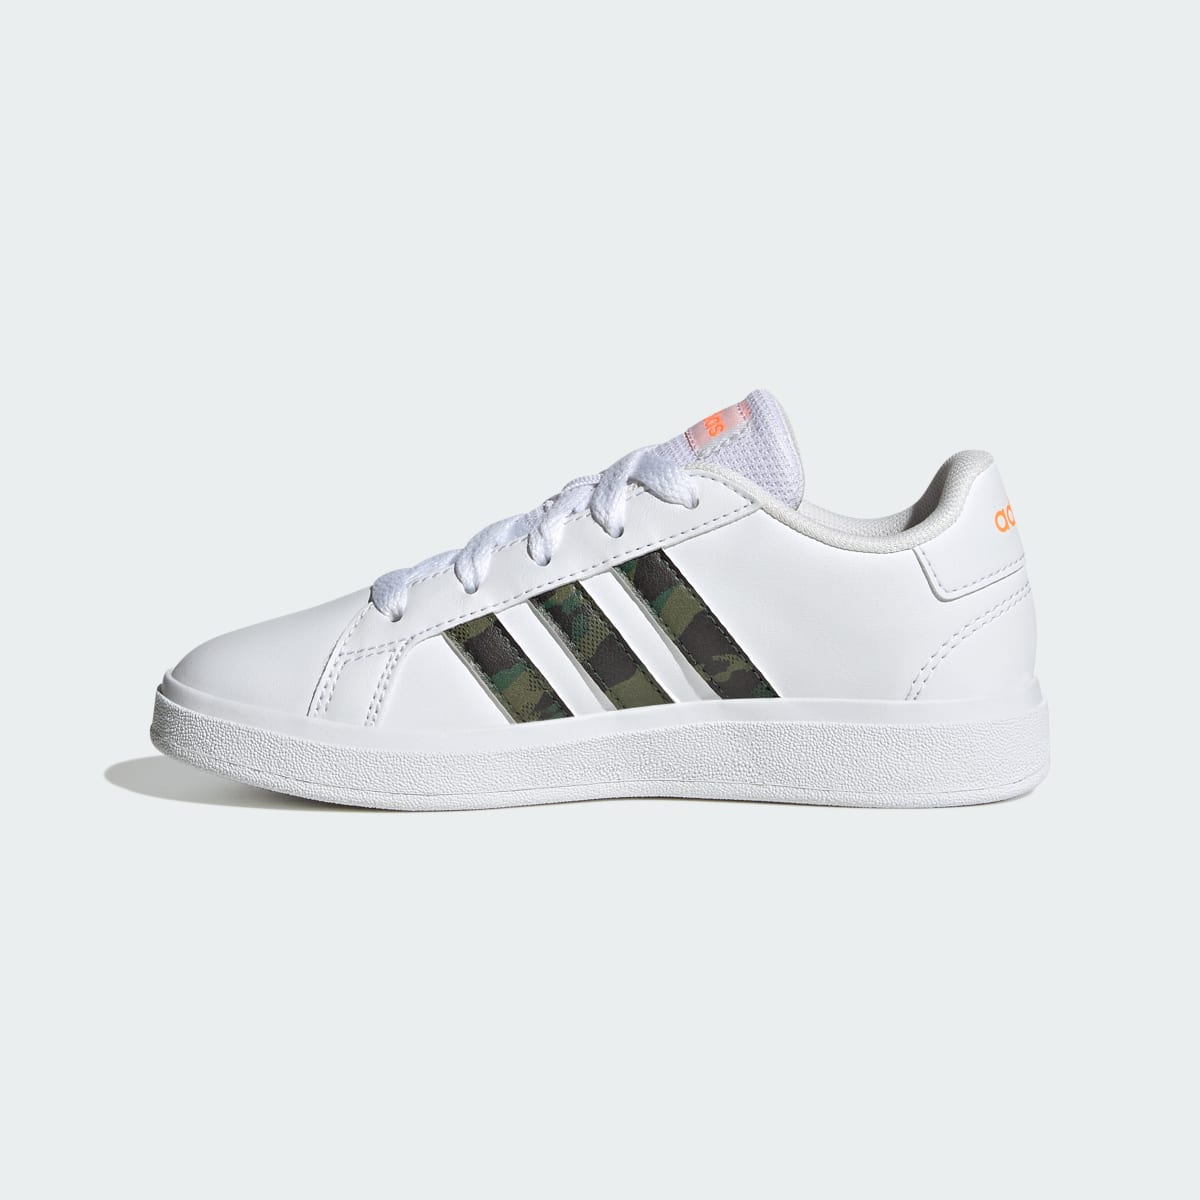 Adidas Grand Court Lifestyle Lace Tennis Shoes. 7